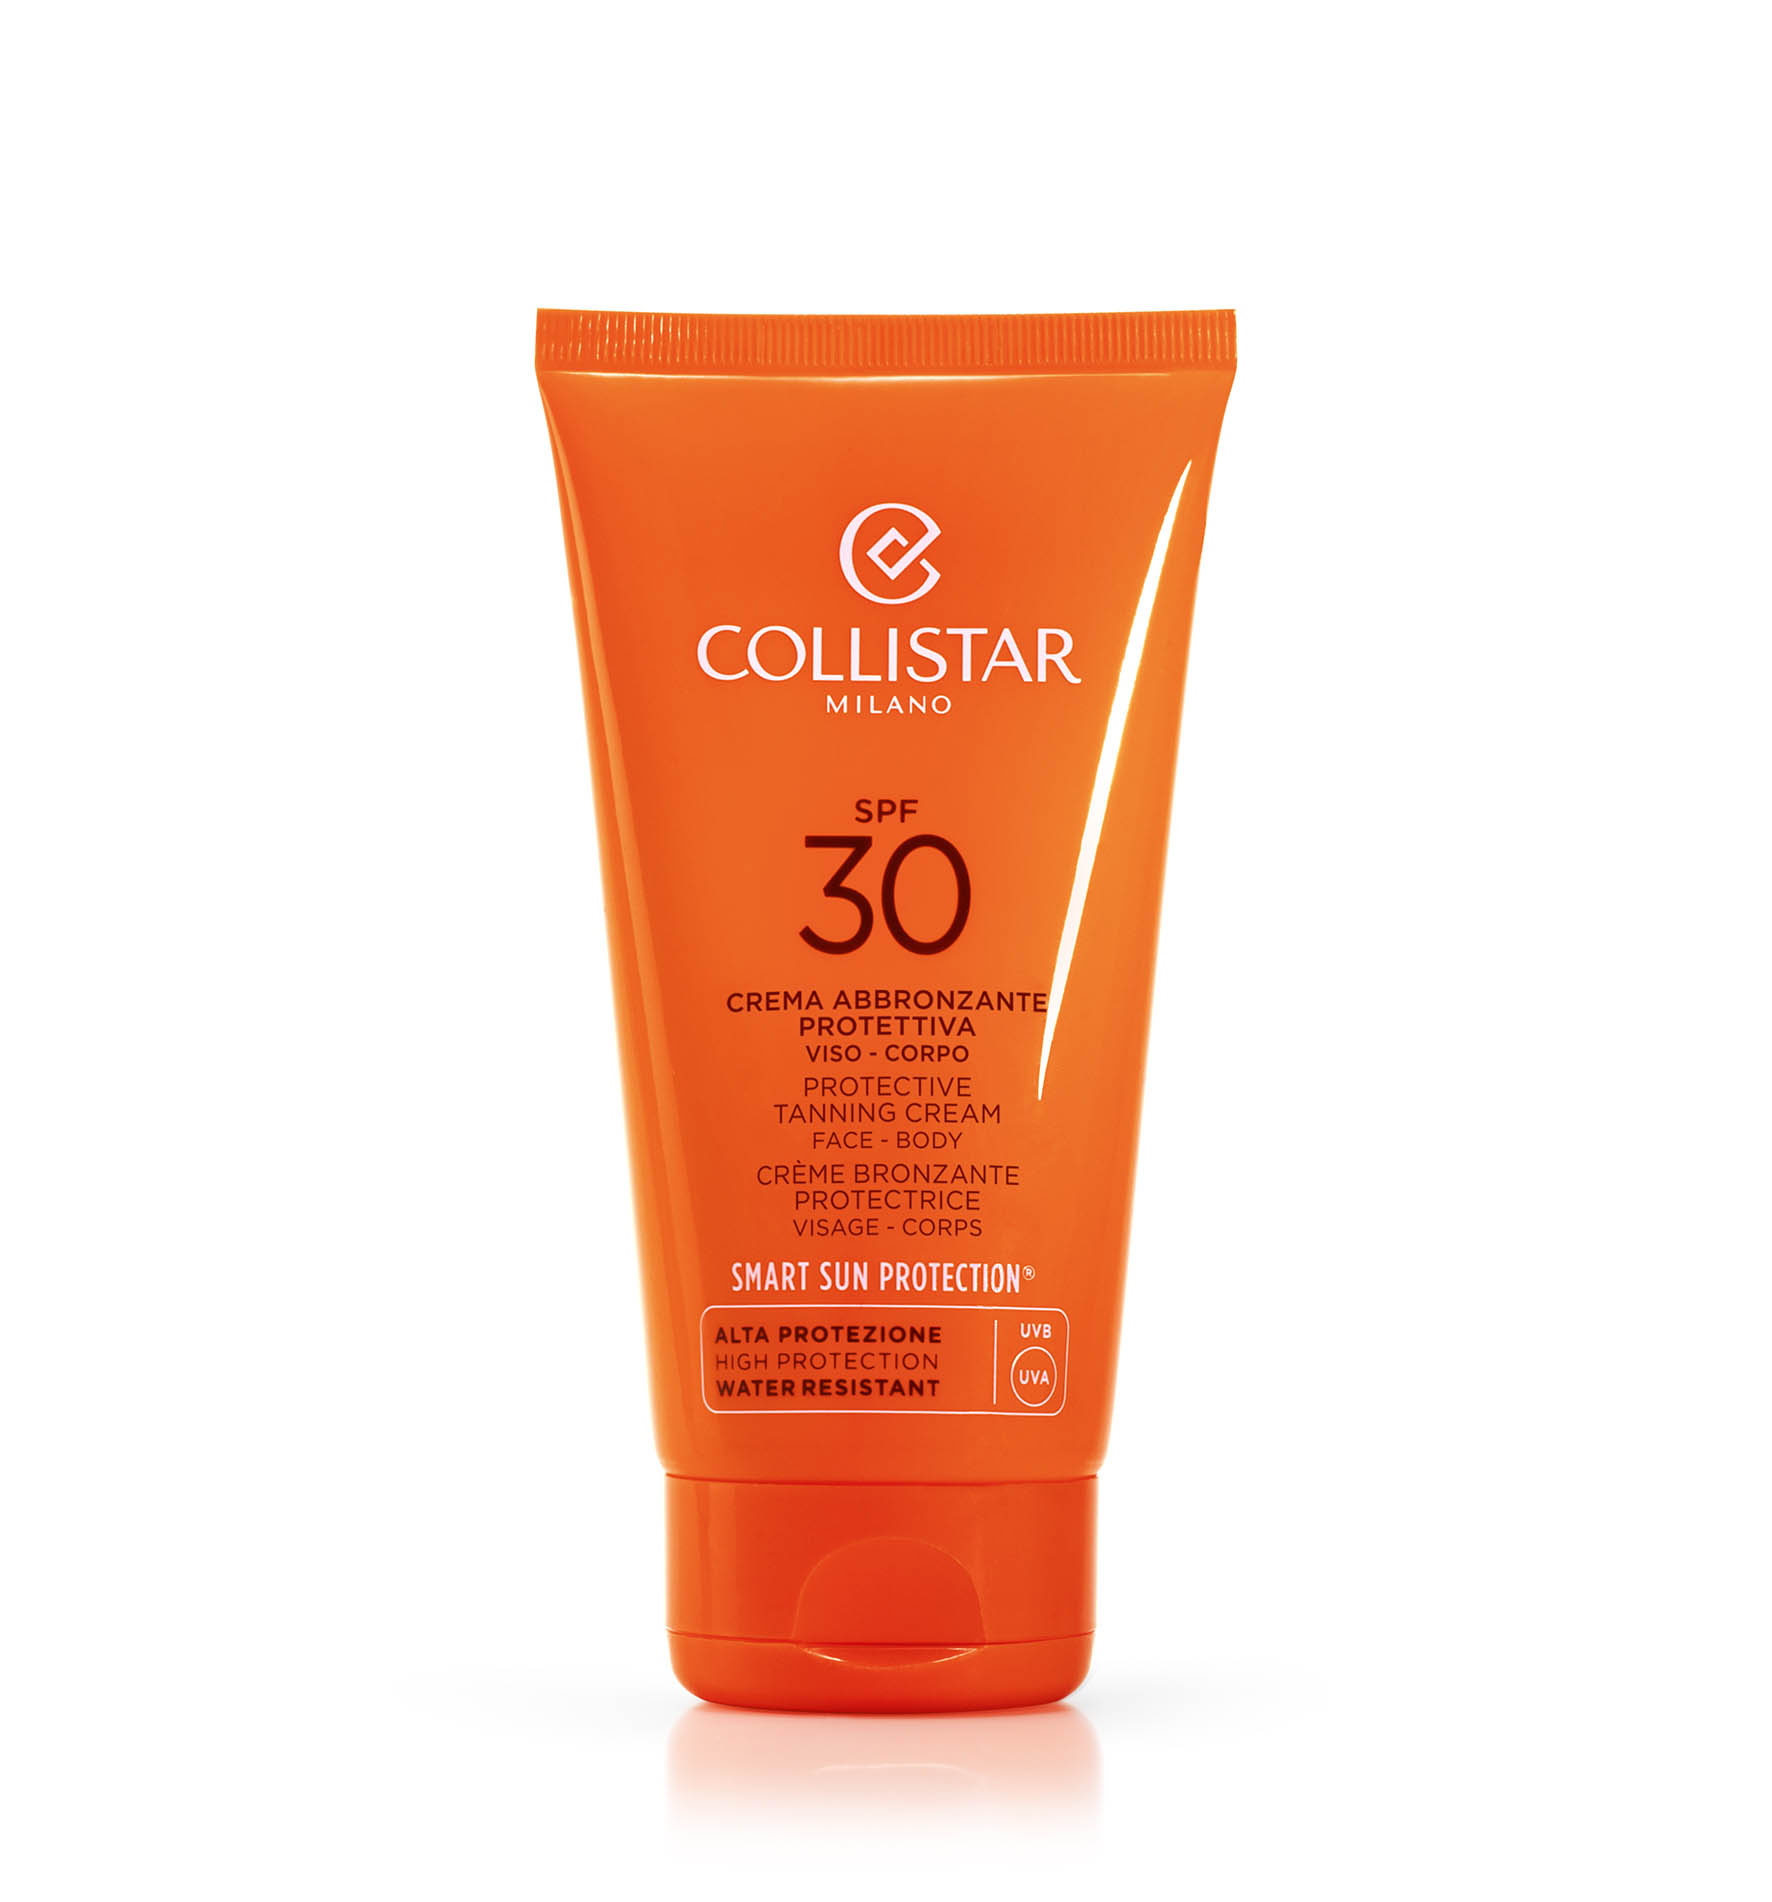 ULTRA PROTECTION TANNING CREAM FACE - BODY SPF 30 - High Protection SPF 30-50+ | Collistar - Shop Online Ufficiale